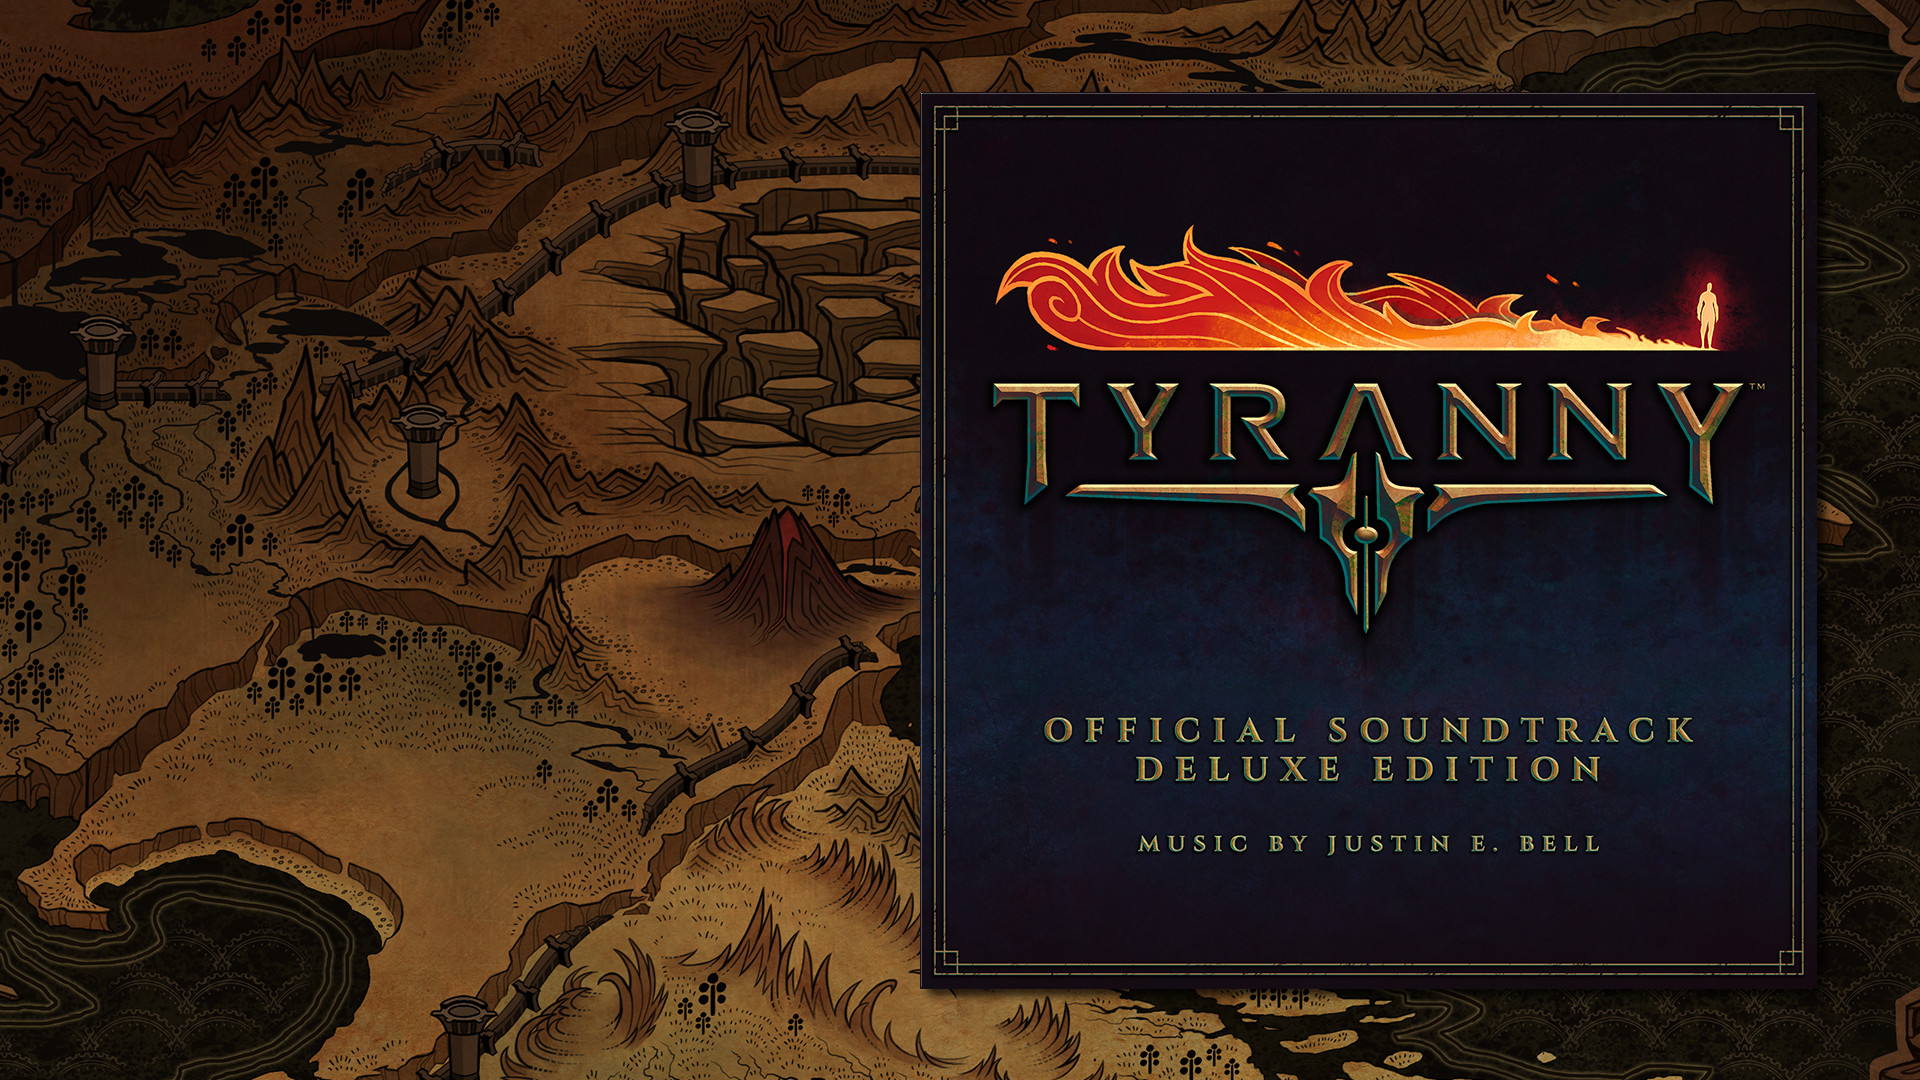 Tyranny - Official Soundtrack Deluxe Edition Featured Screenshot #1